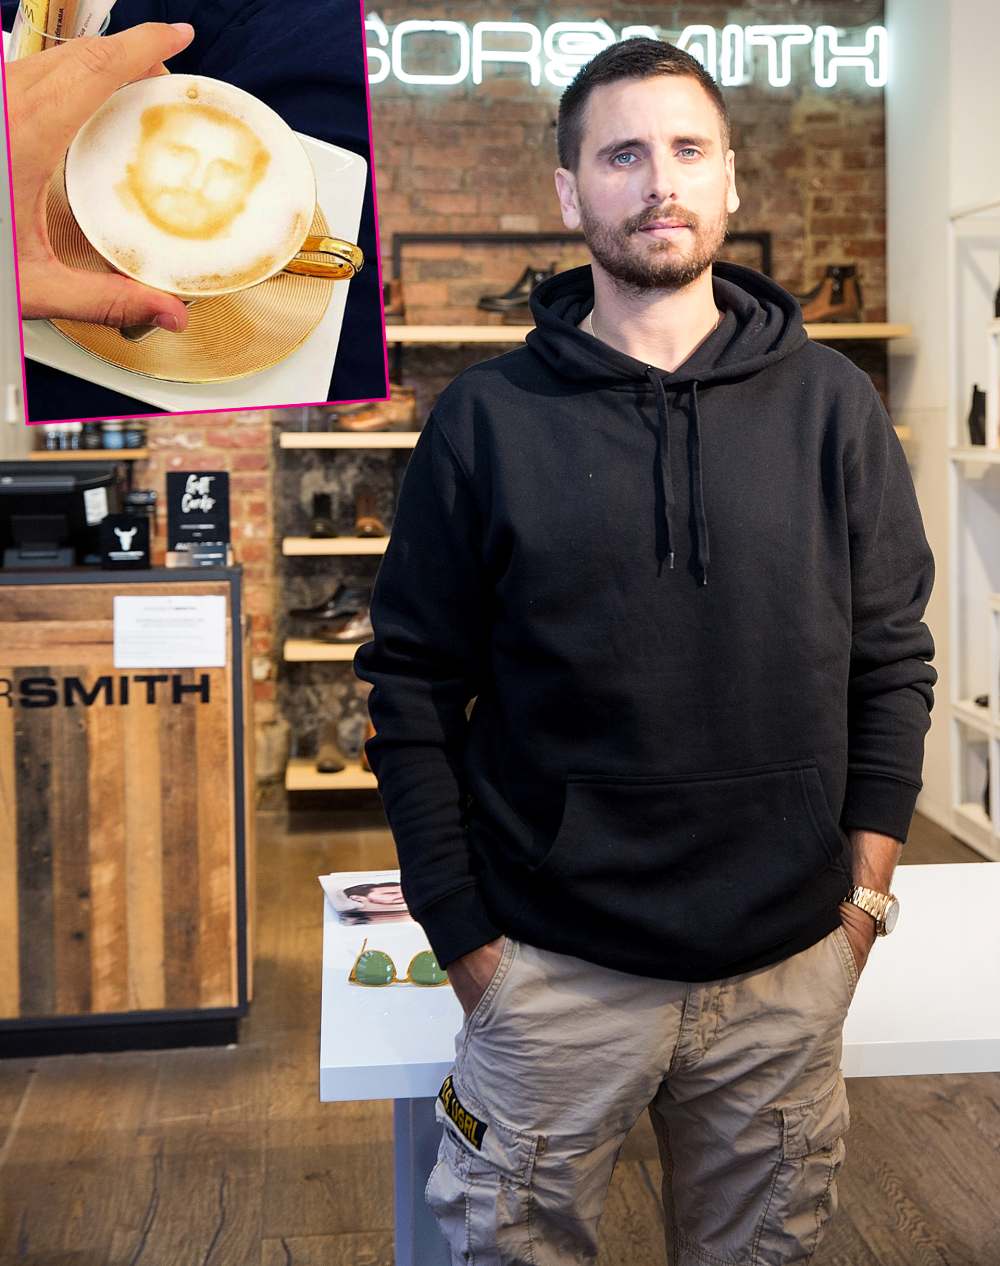 Scott Disick Drank a Beverage With a Foam Art Version of His Face on It: ‘Lord Tea’